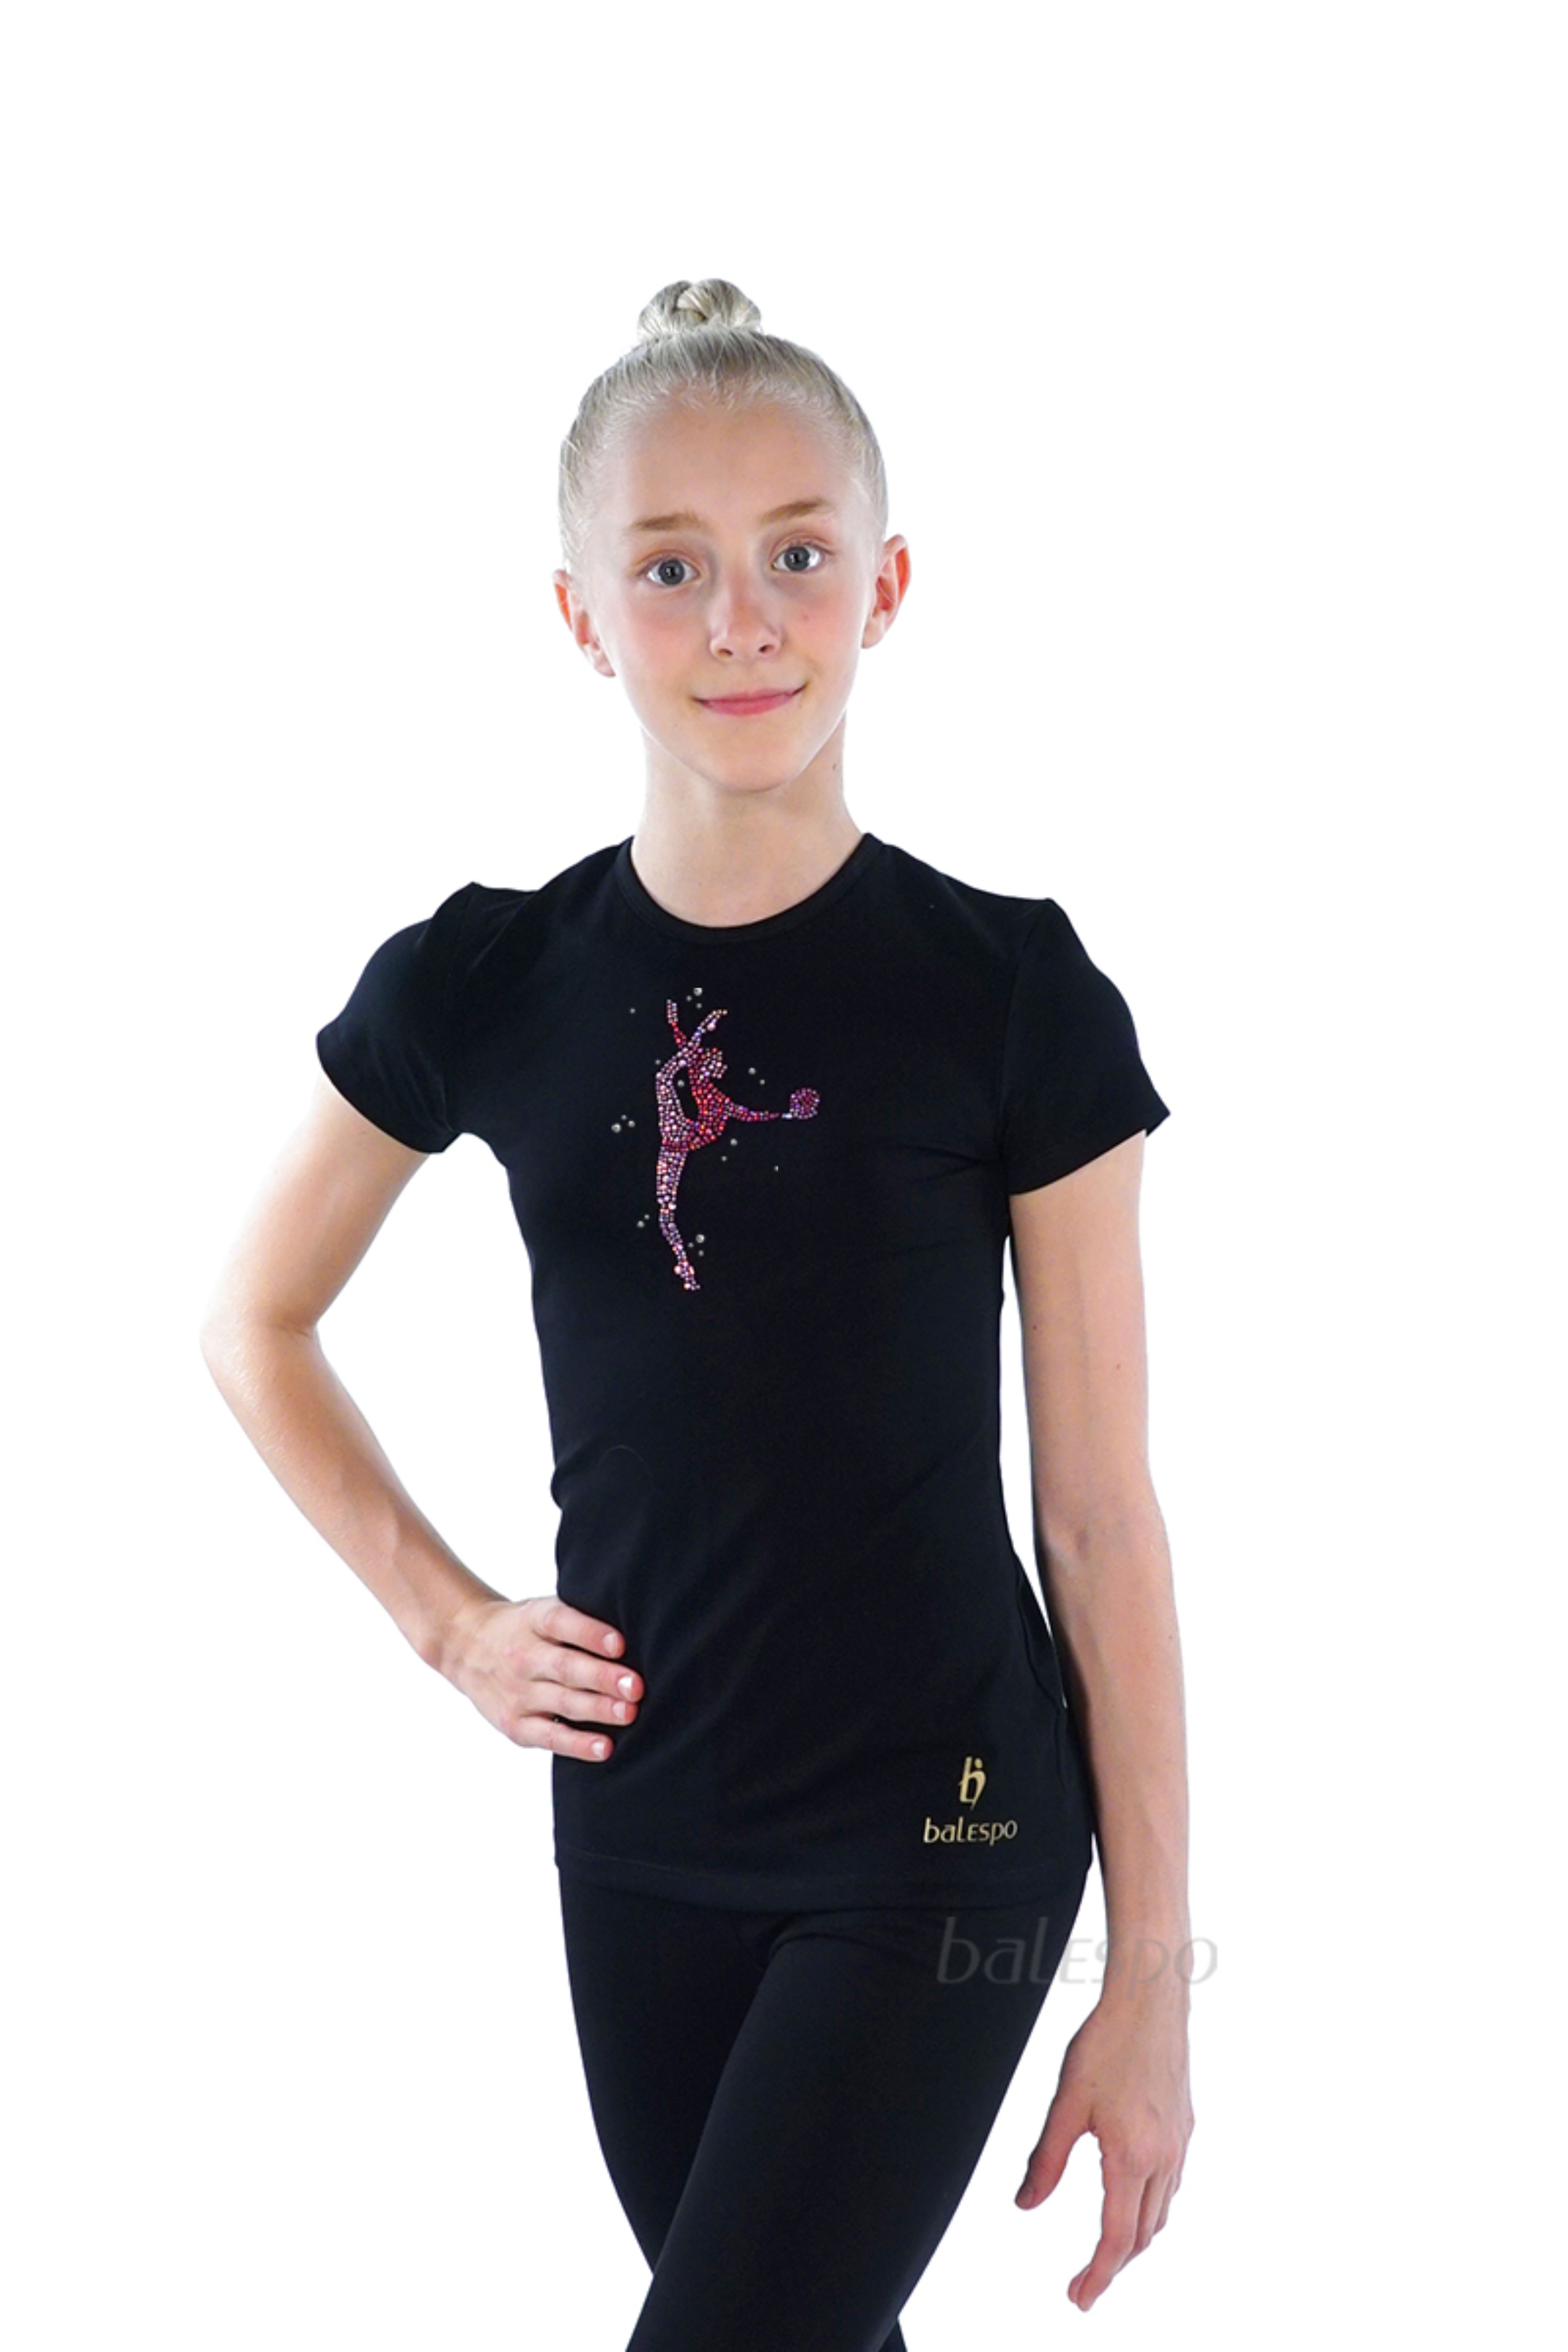 Gymnastics tight-fitting t-shirt BALESPO BC210.2-100 black with pink crystals "Gymnast with ball" size 42 (158)